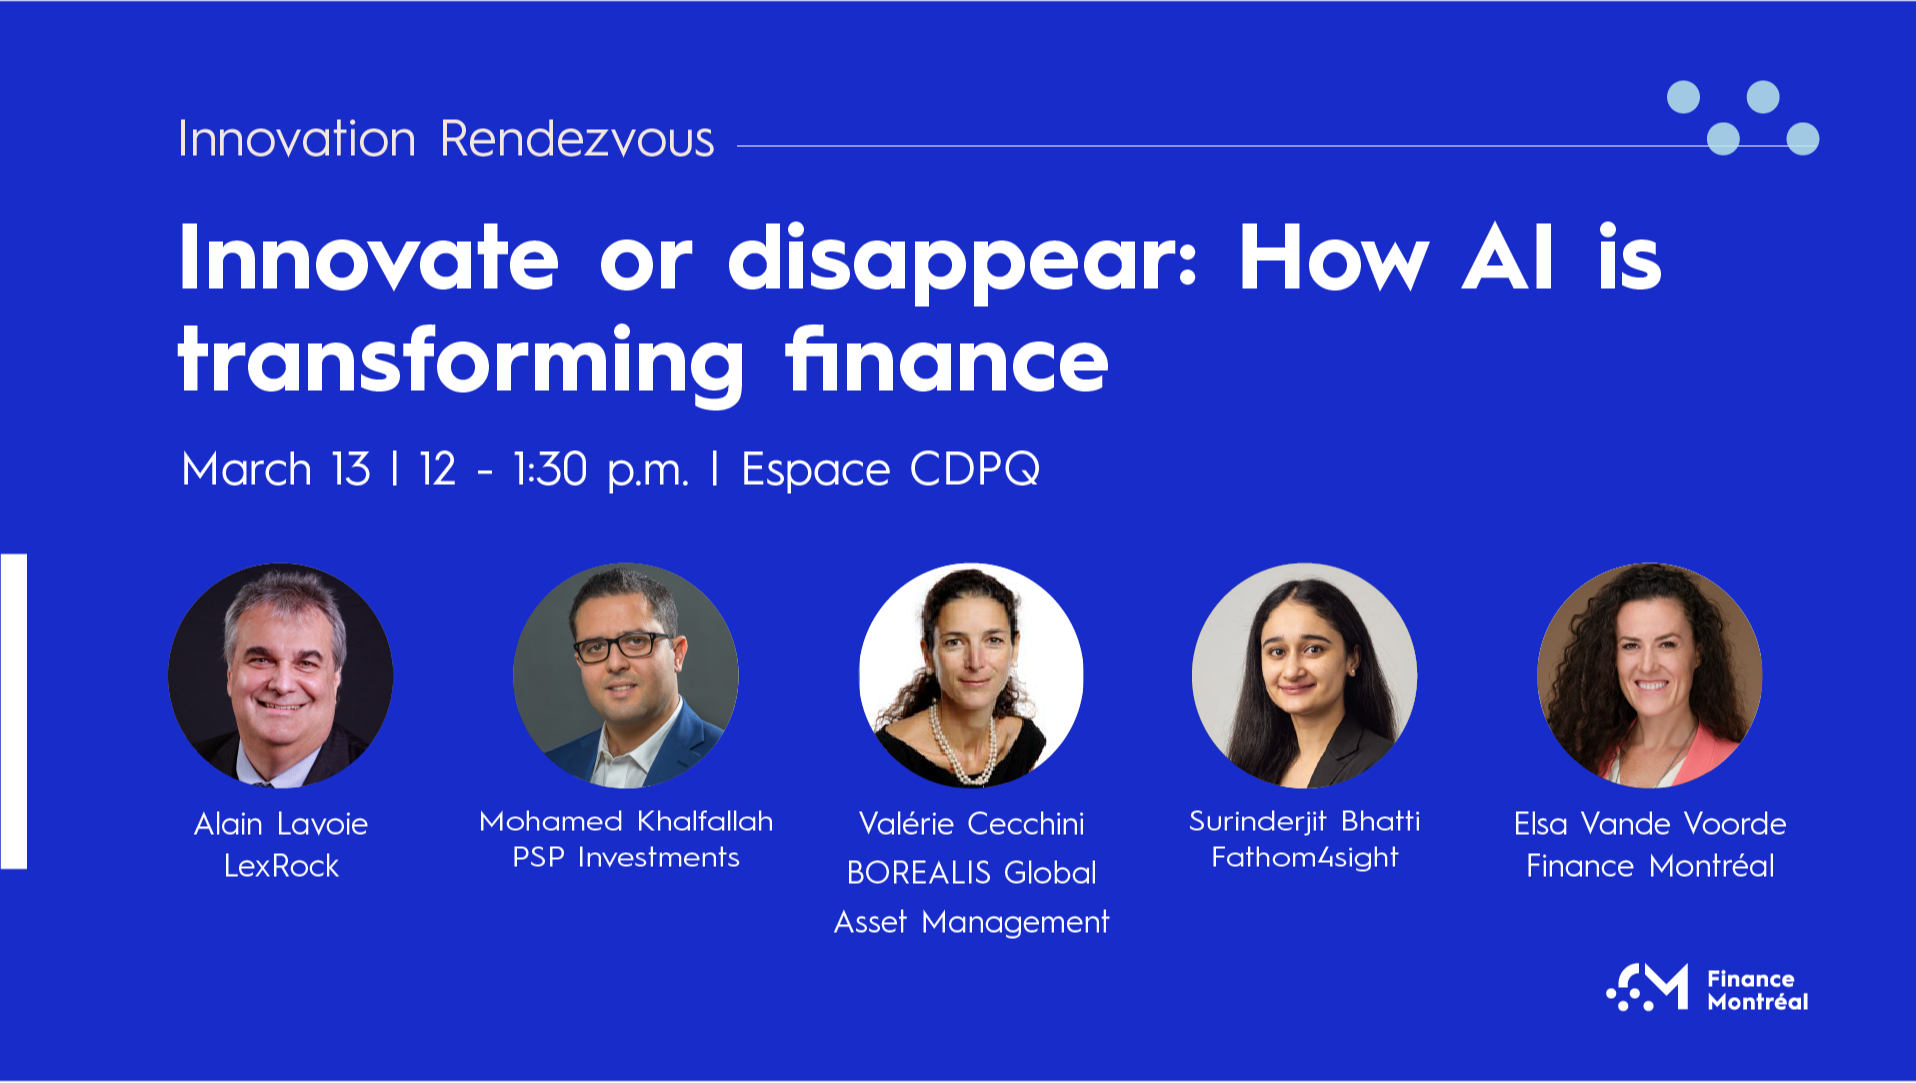 Innovate or disappear: How AI is transforming finance